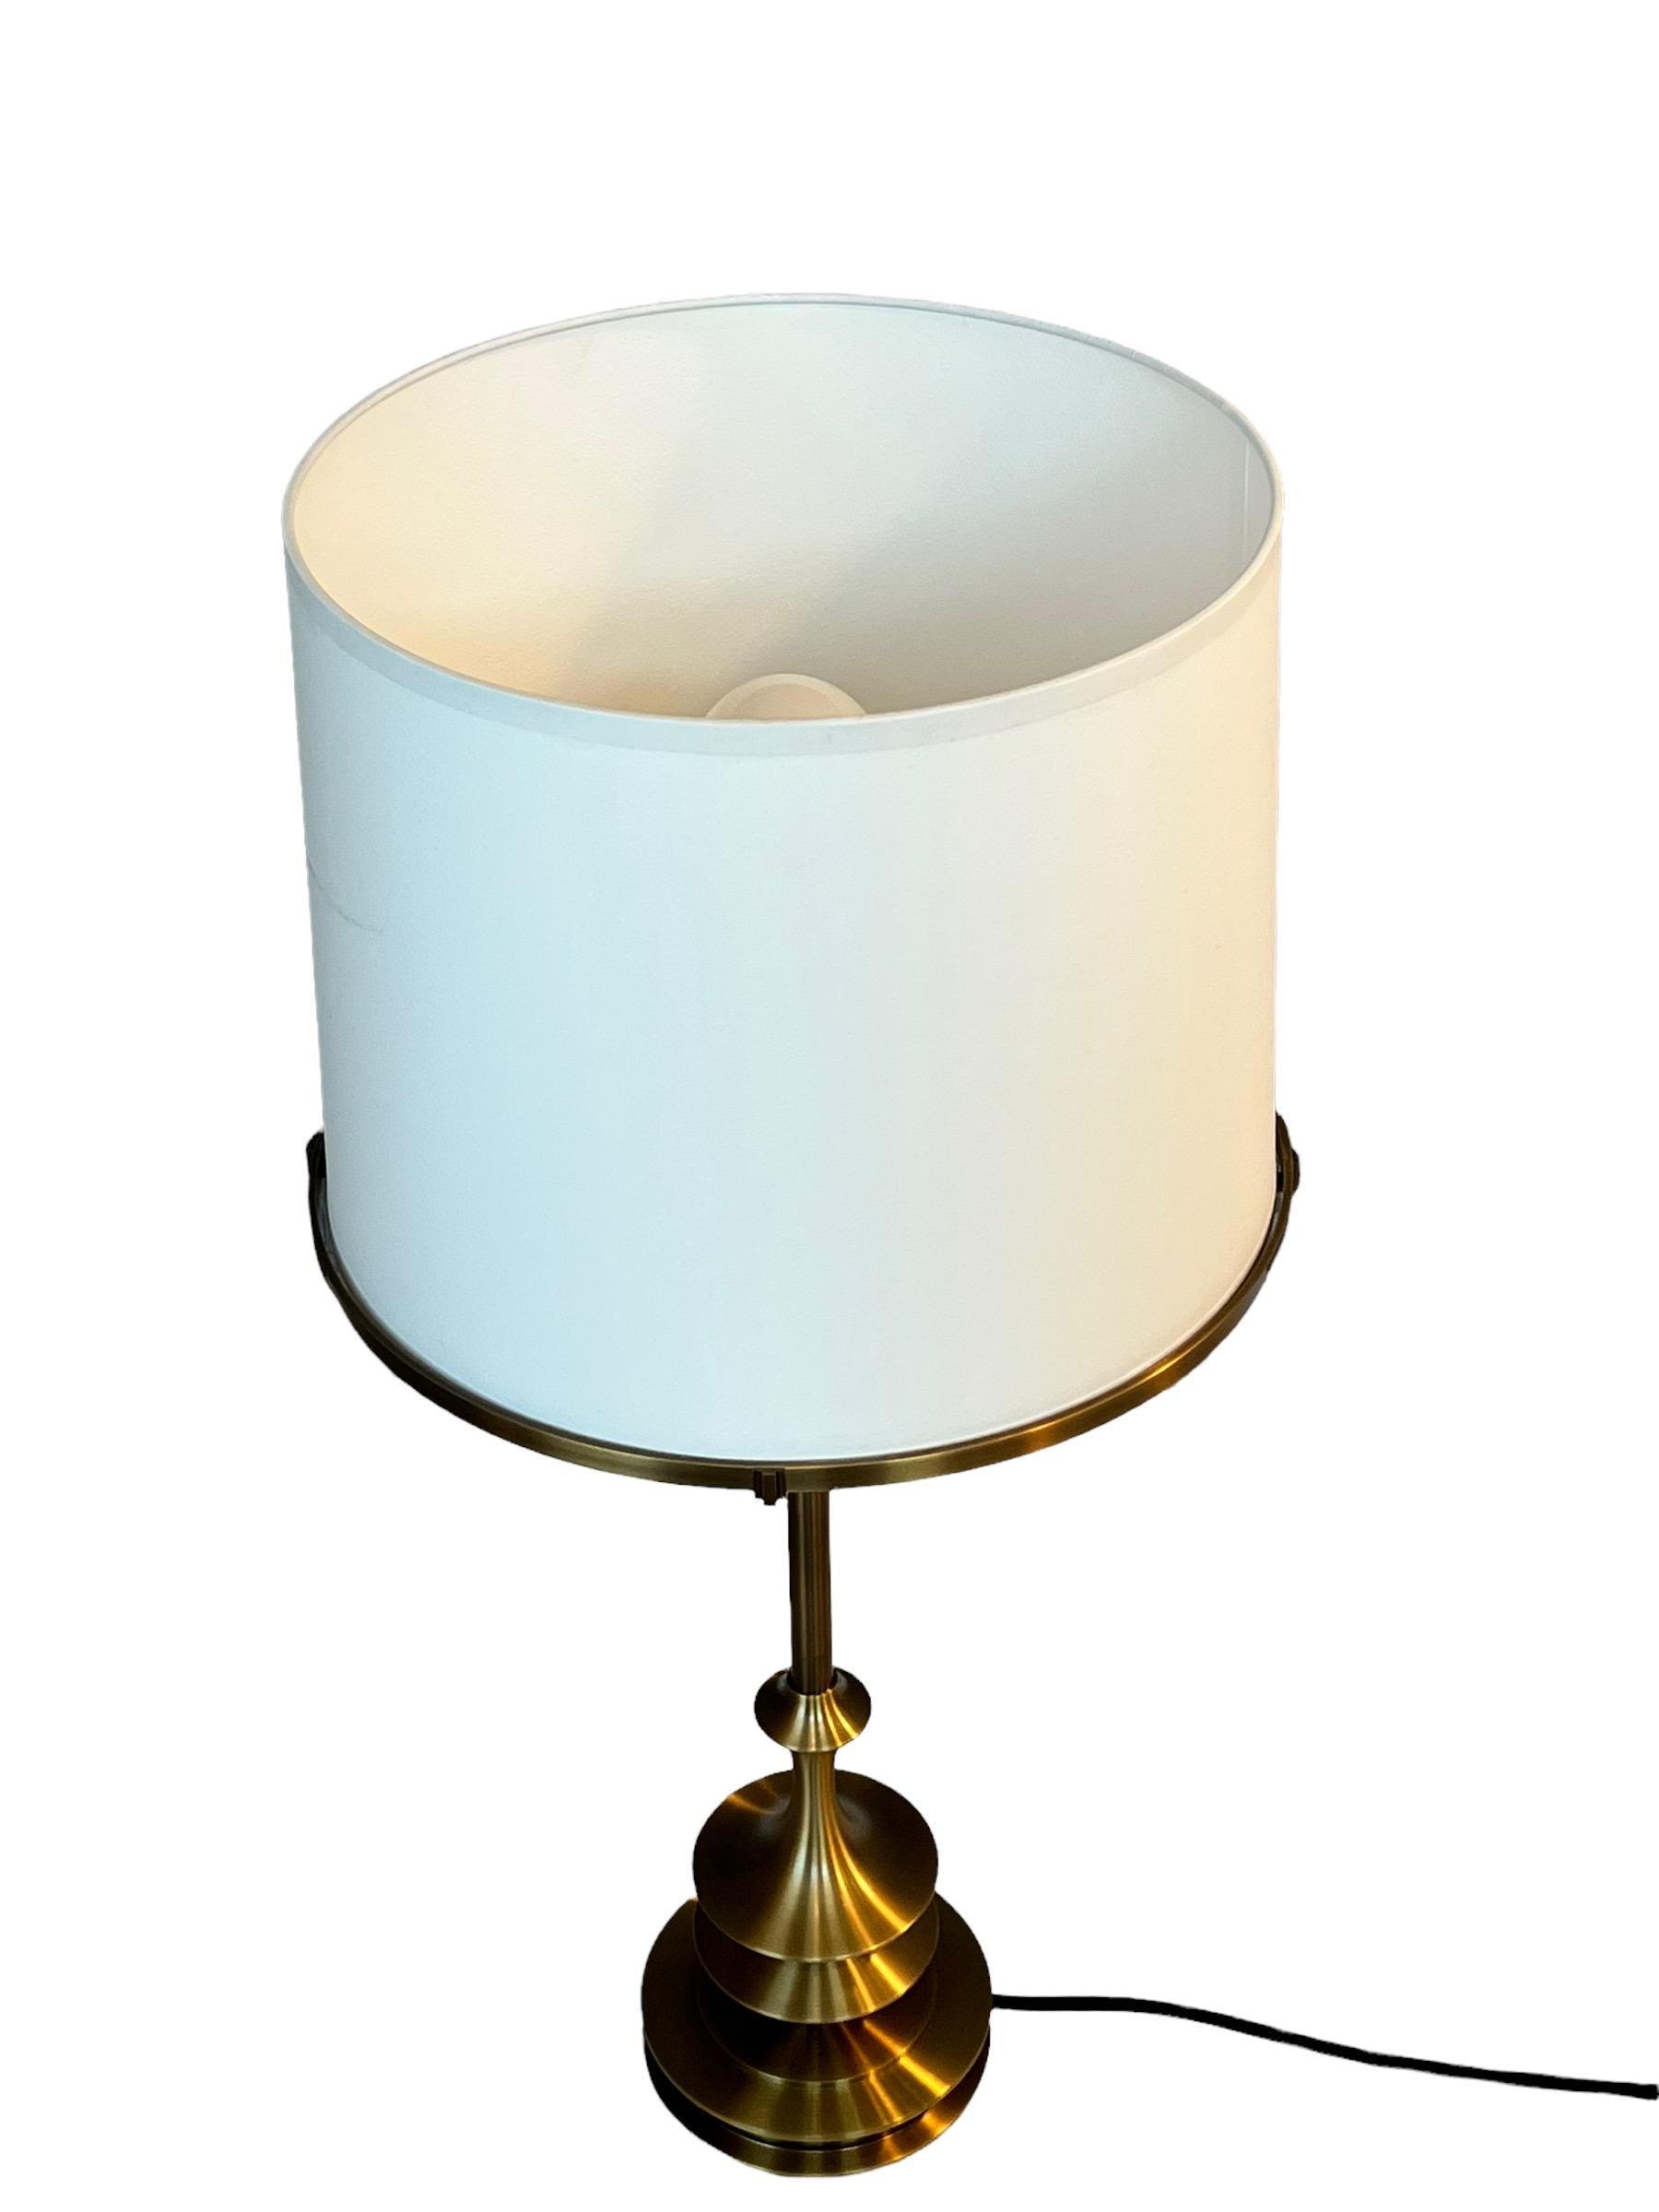 American Contemporary Pair of Side Table Lamps, Solid Brass by Designer Solis Betancourt